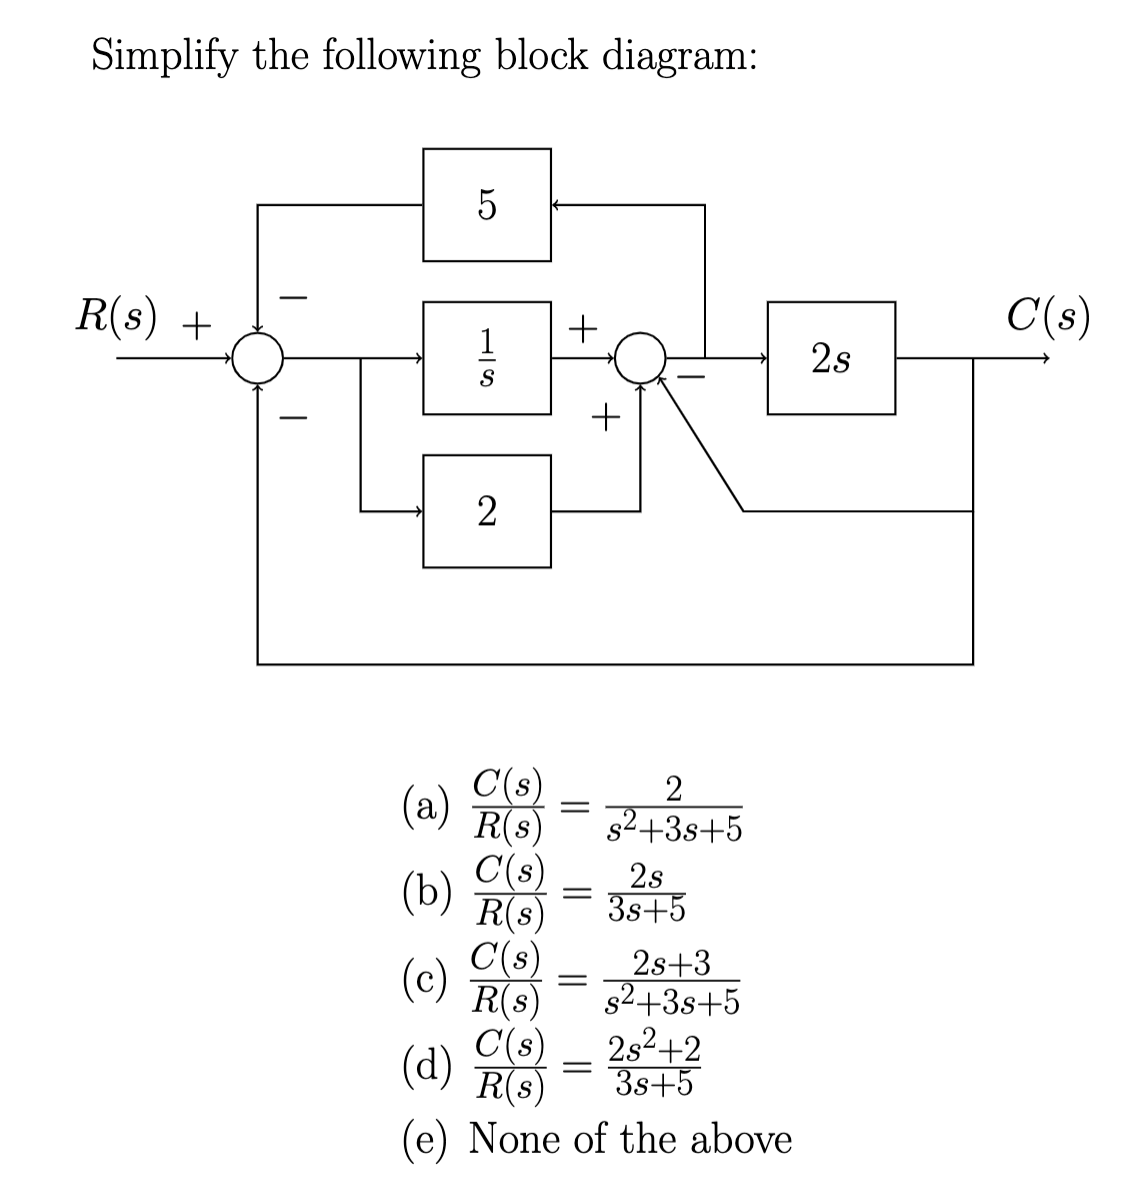 Simplify the following block diagram:
R(s) +
5
1
S
2
C(s)
R(s)
+
C(s)
R(s)
C(s)
R(s)
(a)
(b)
(c)
C(s)
2s²+2
(d)
R(s) 3s+5
(e) None of the above
=
=
=
+
=
2
s²+3s+5
2s
3s+5
2s+3
s²+3s+5
2s
C(s)